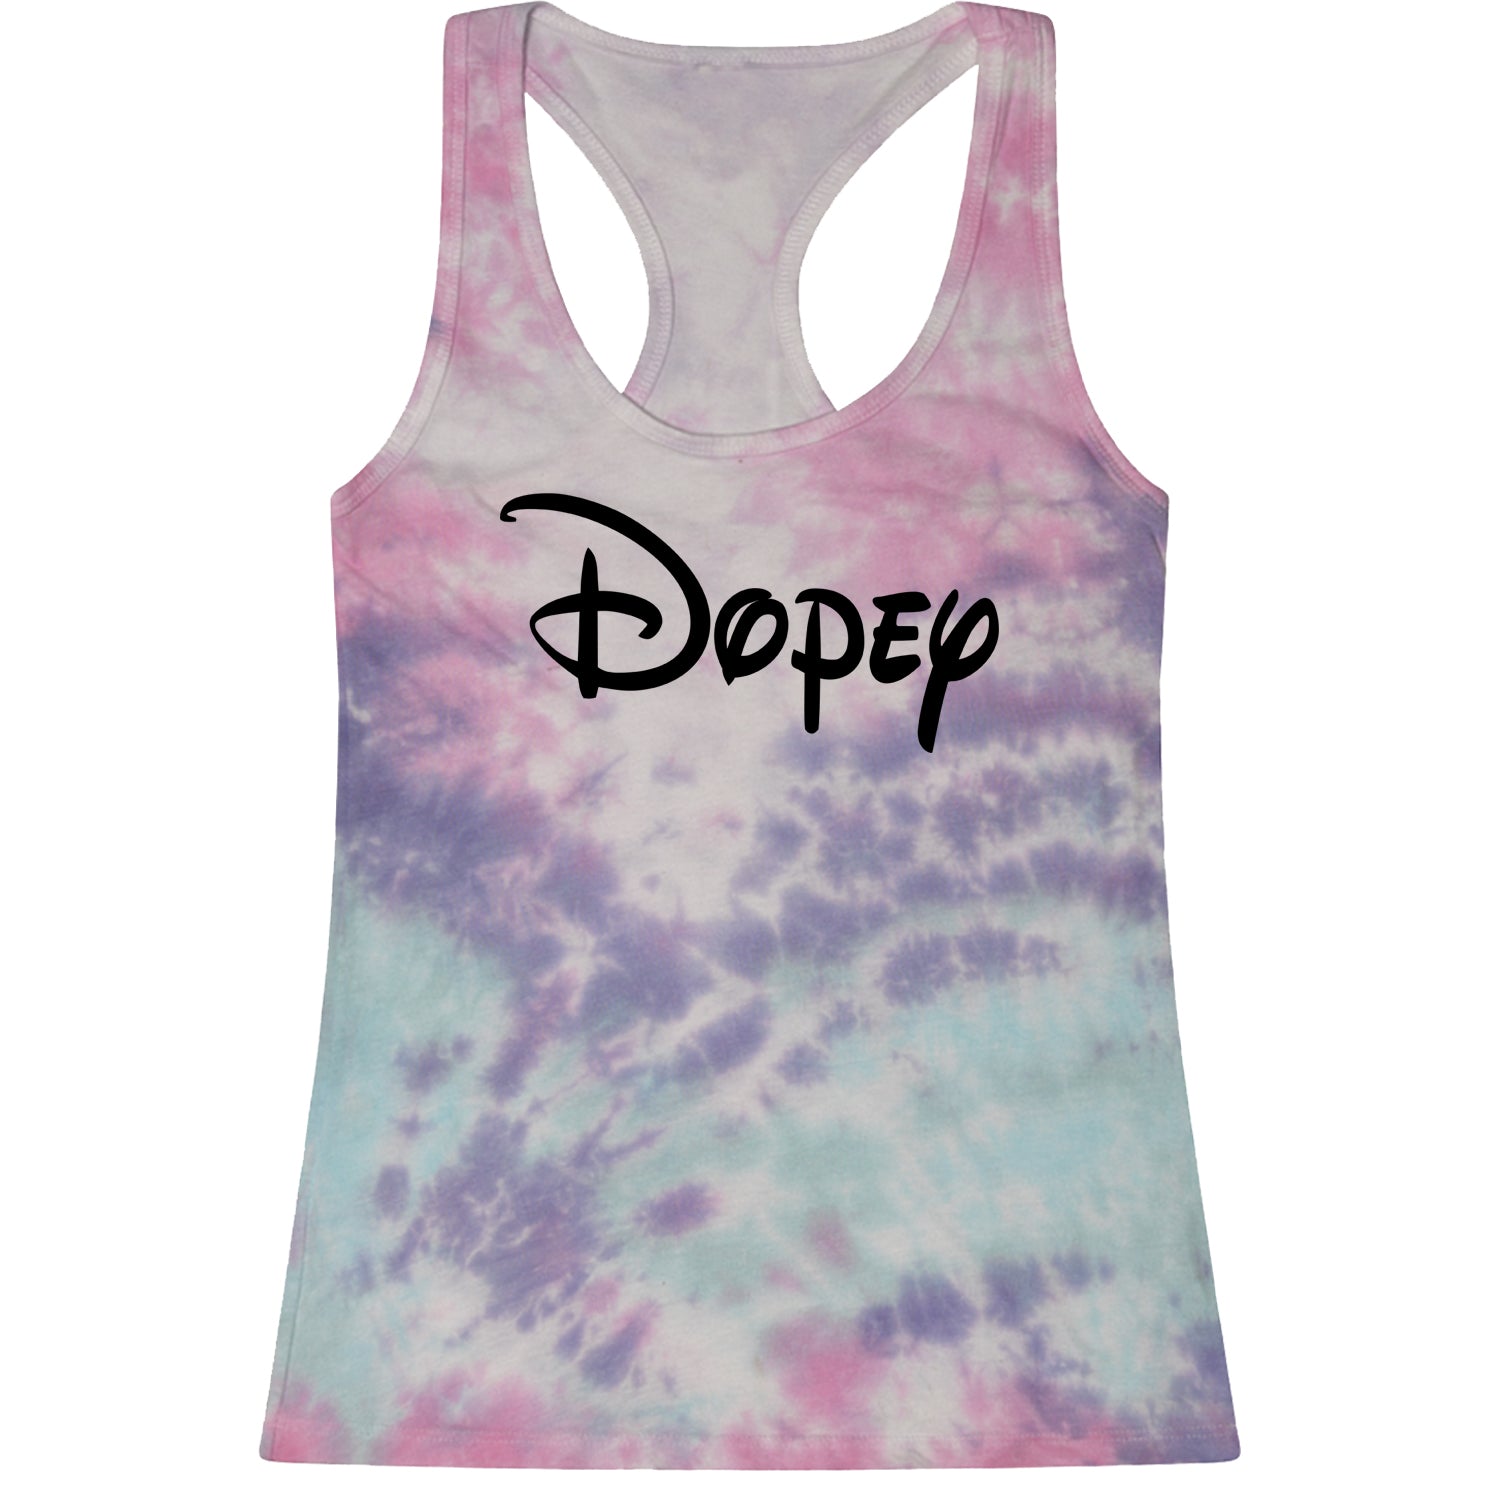 Dopey - 7 Dwarfs Costume Racerback Tank Top for Women and, costume, dwarfs, group, halloween, matching, seven, snow, the, white by Expression Tees